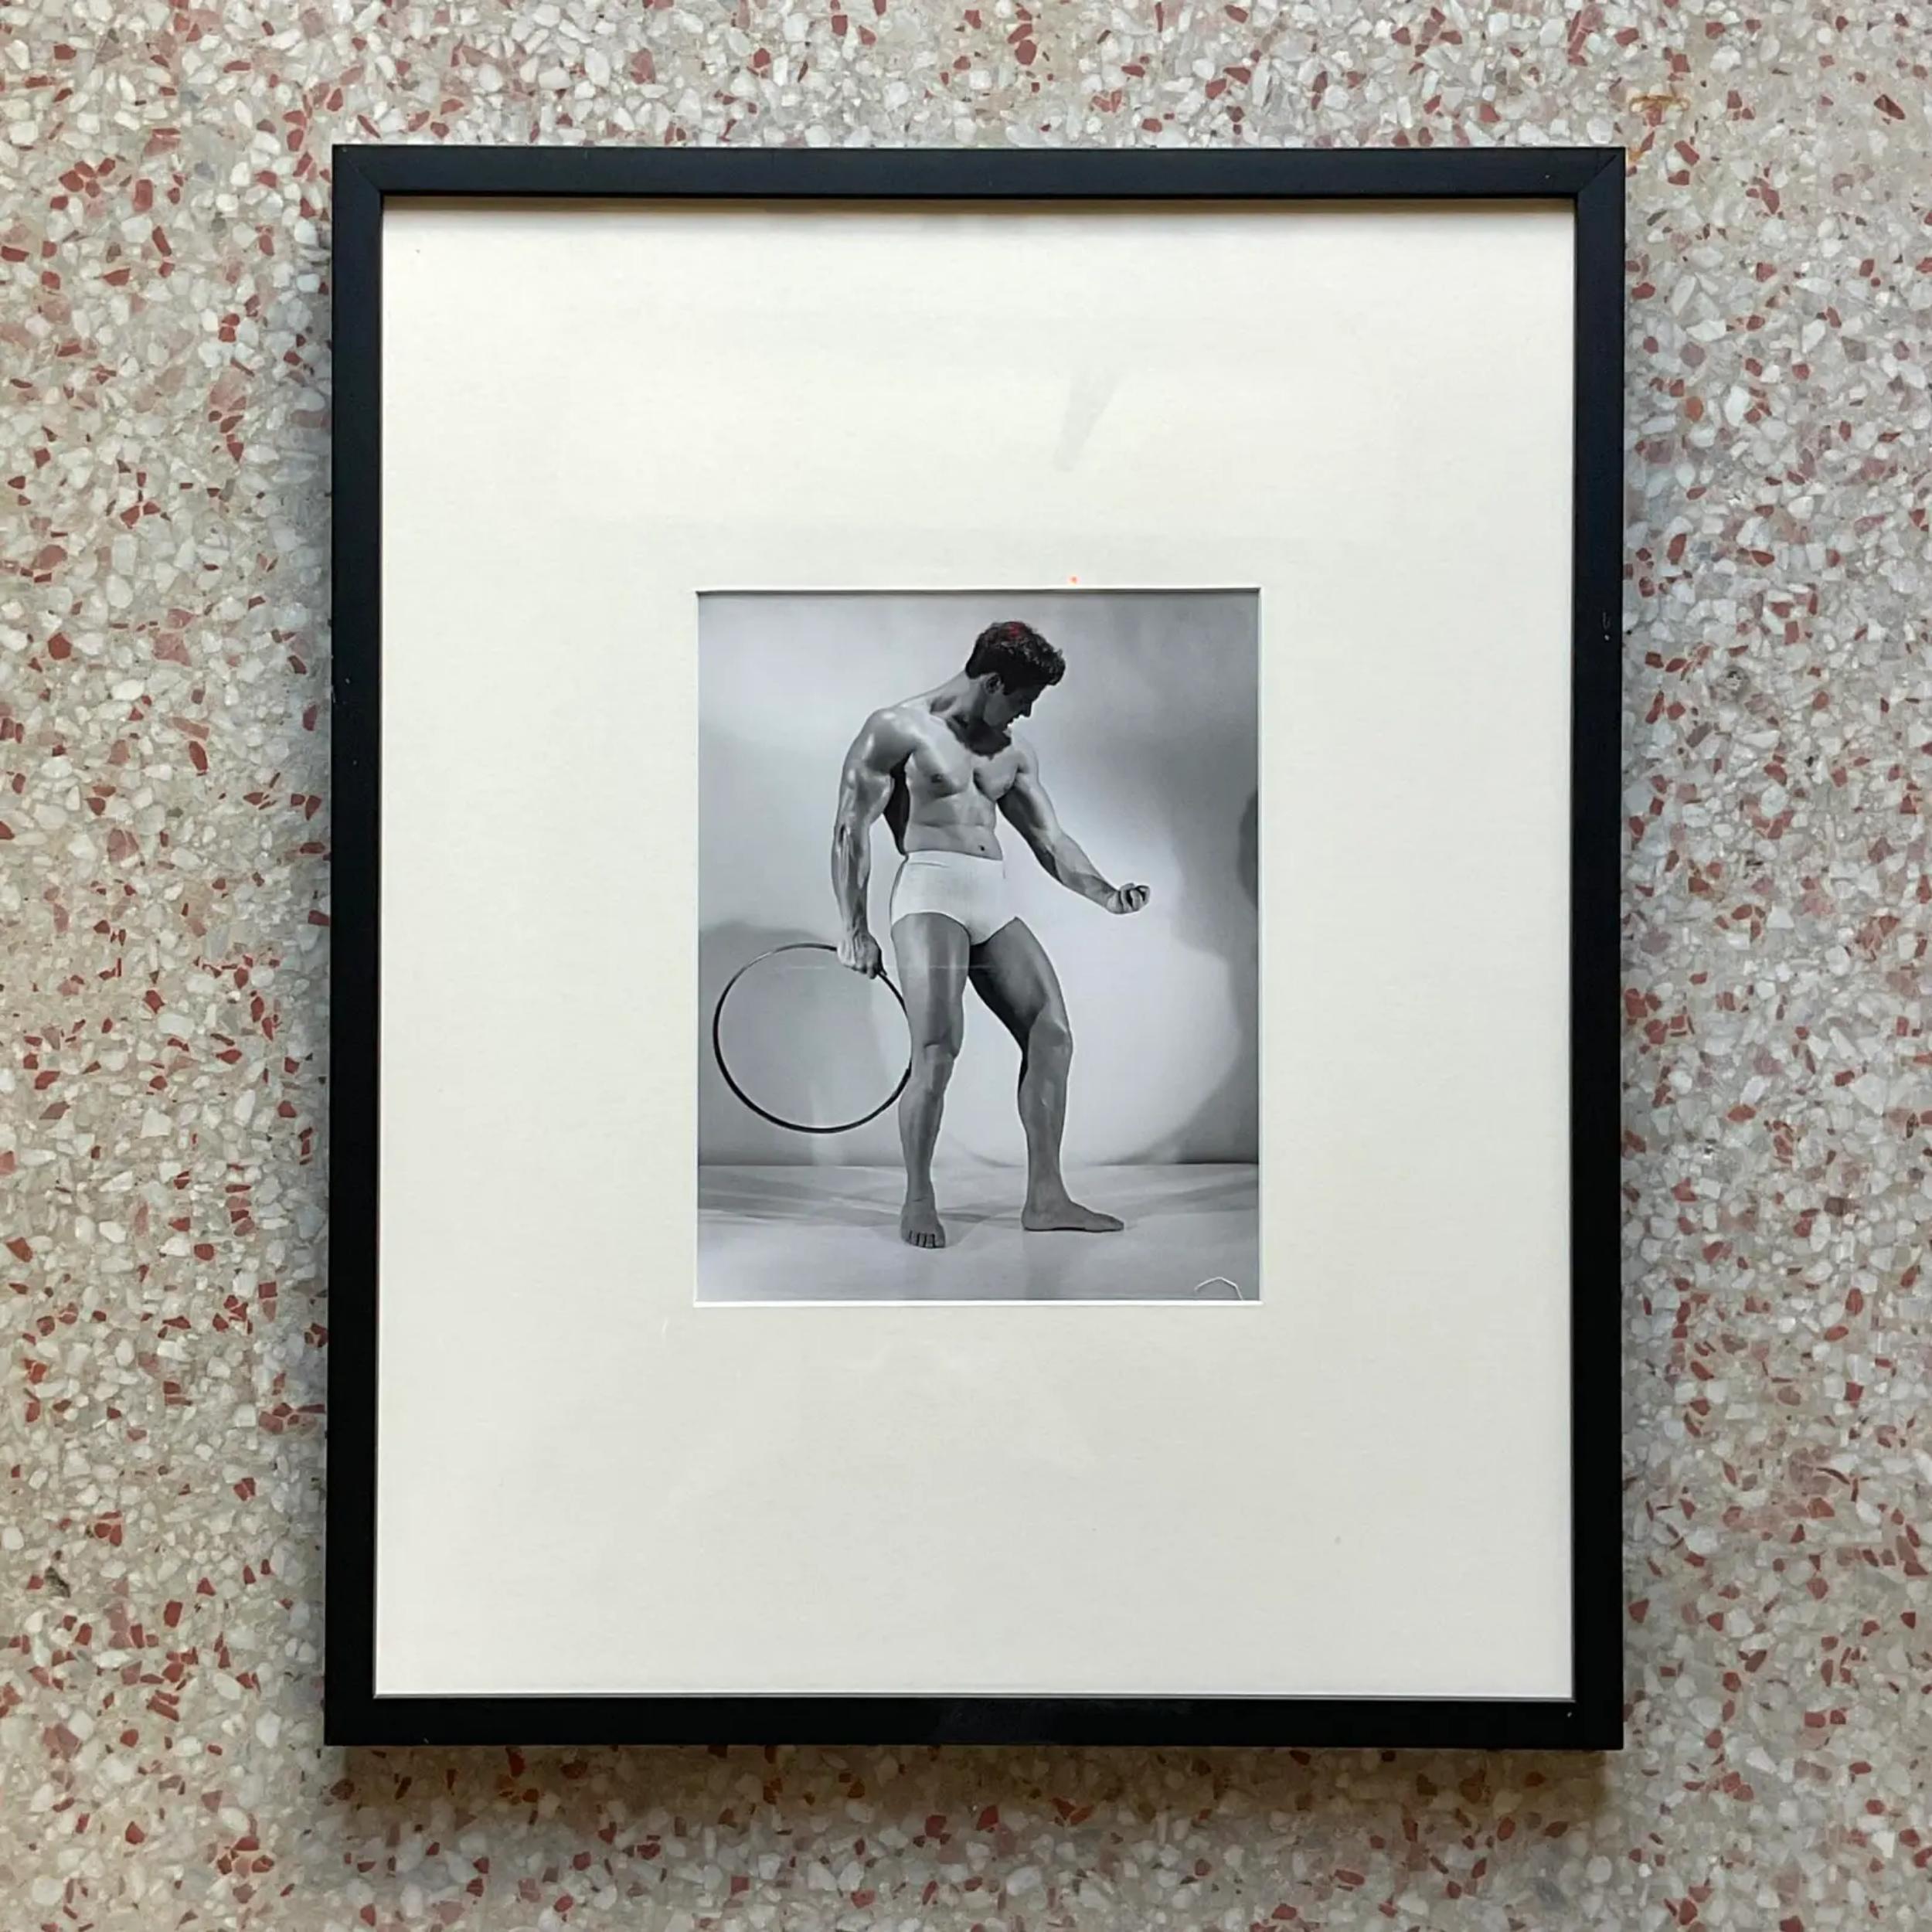 American Mid 20th Century Vintage Bruce of La Vintage Framed Photograph on Man with Hoop For Sale